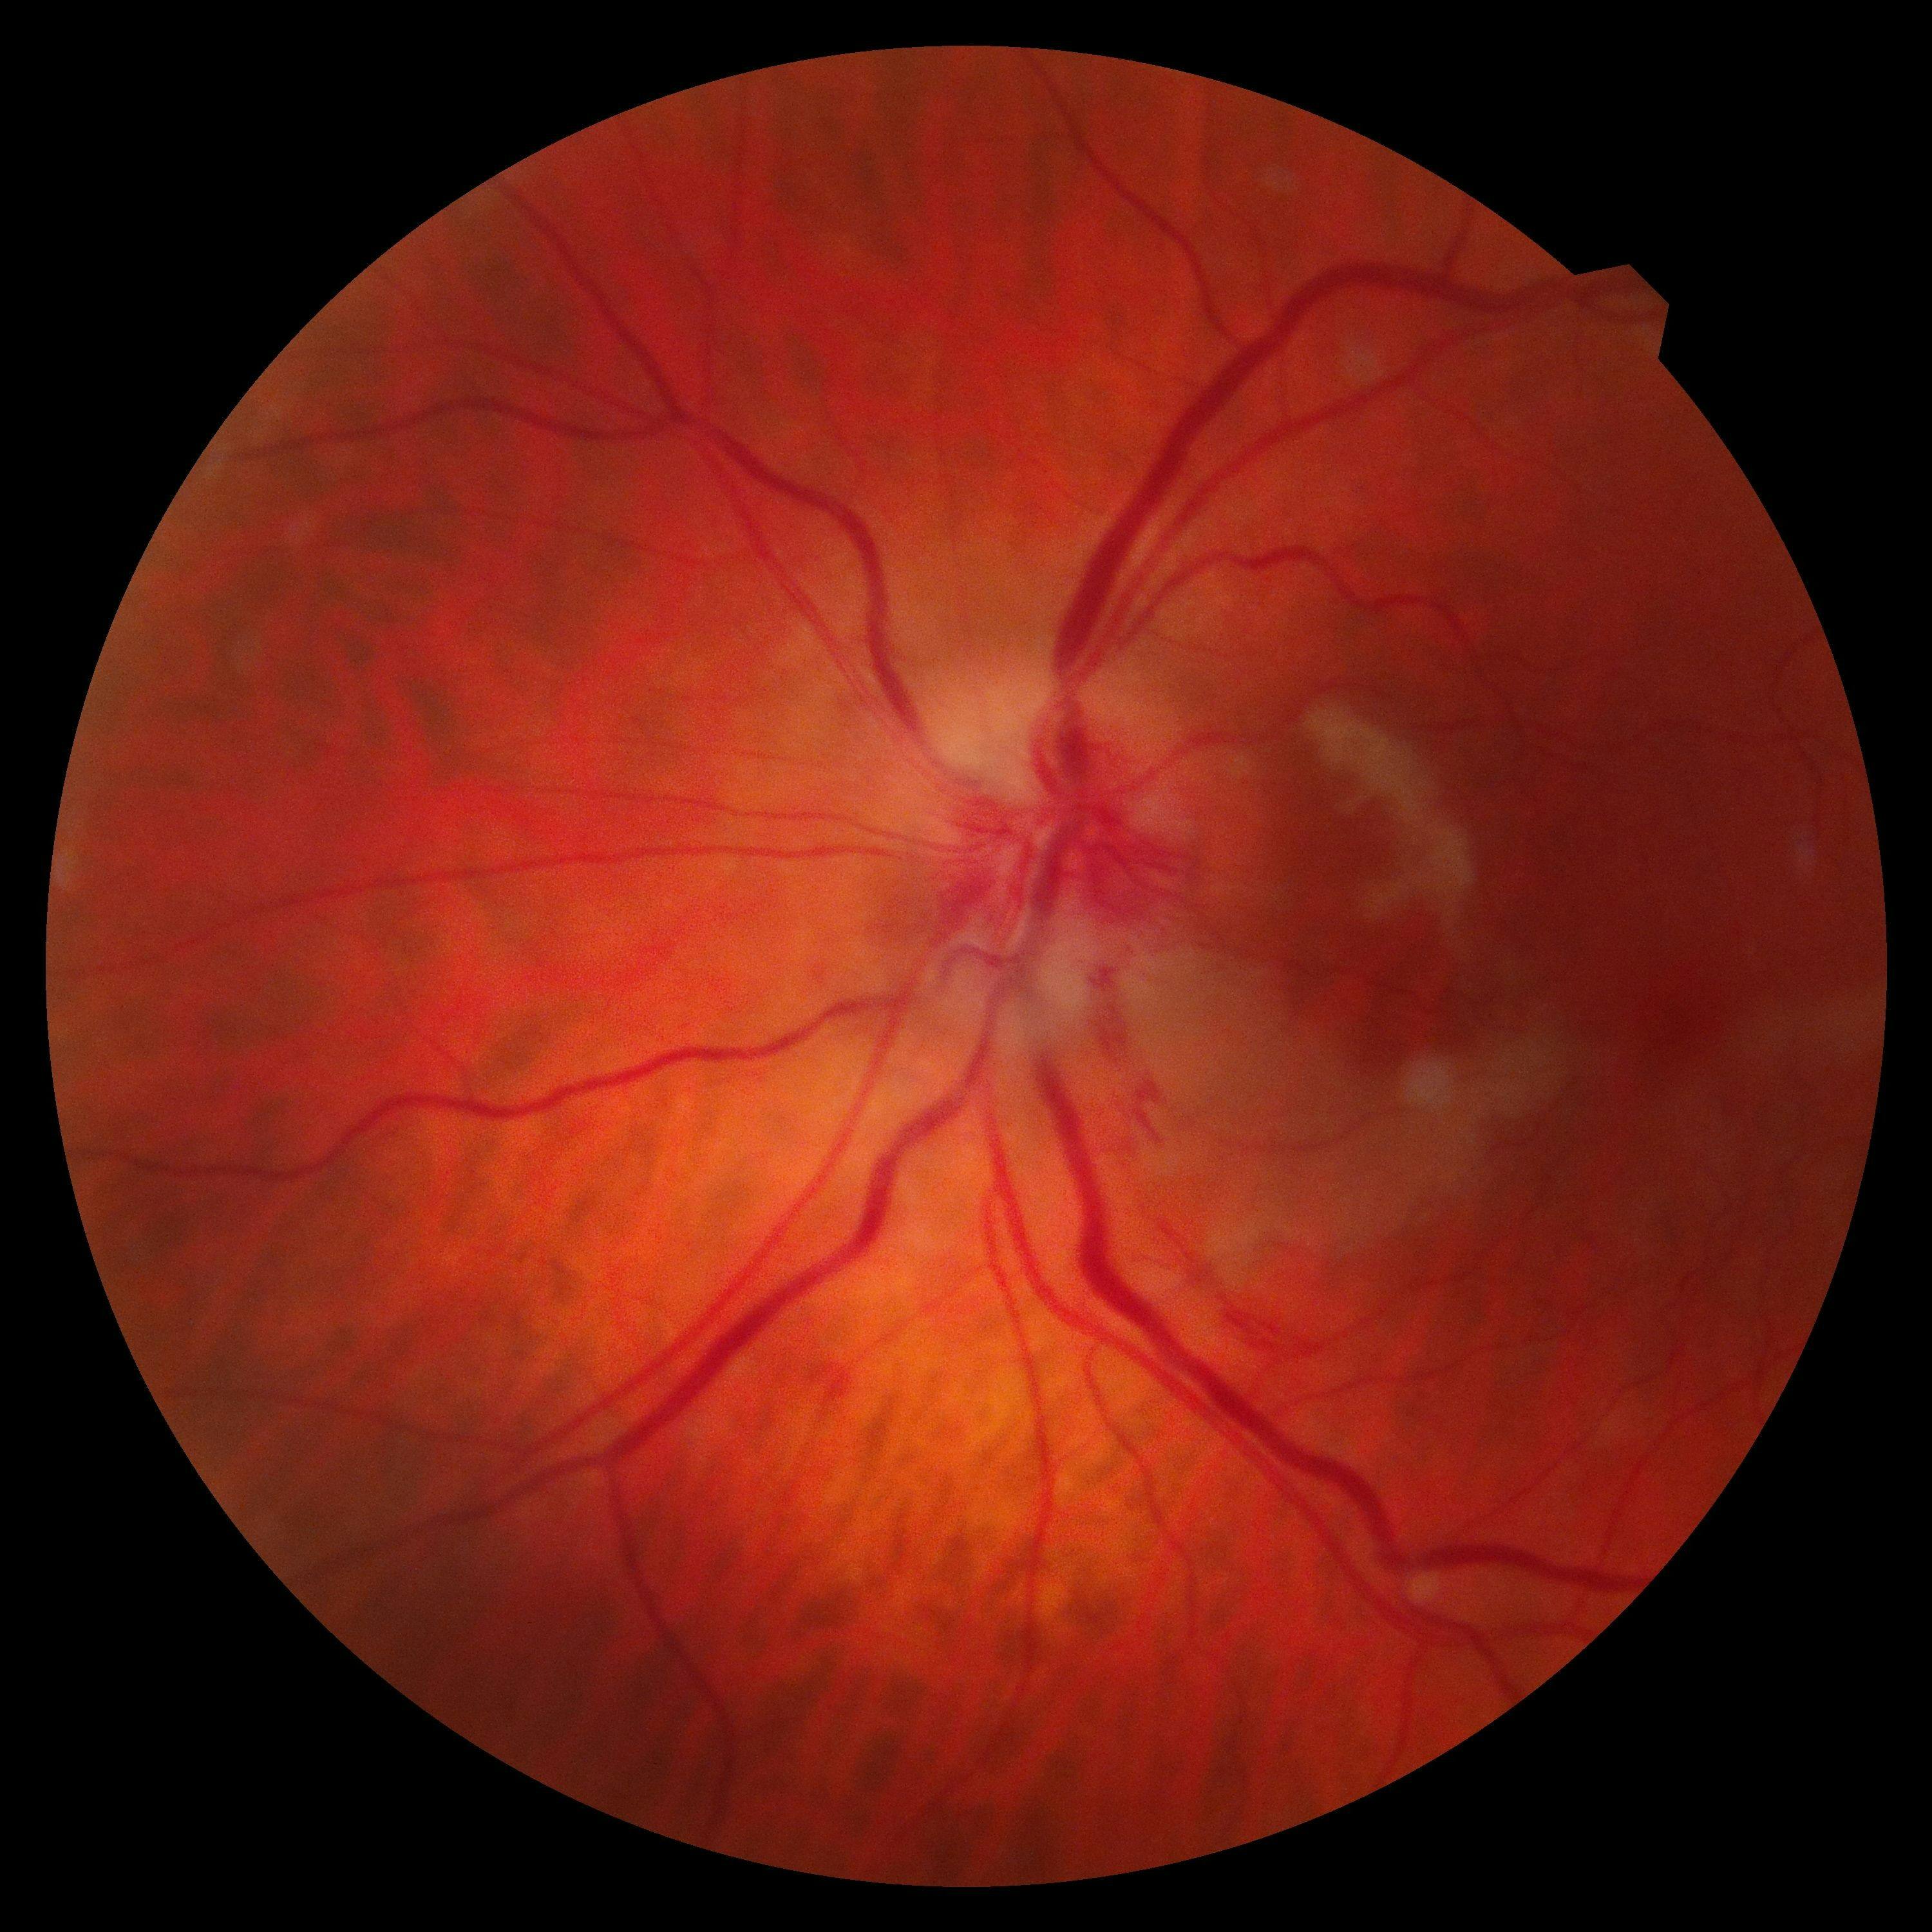 OS fundus 5 day review